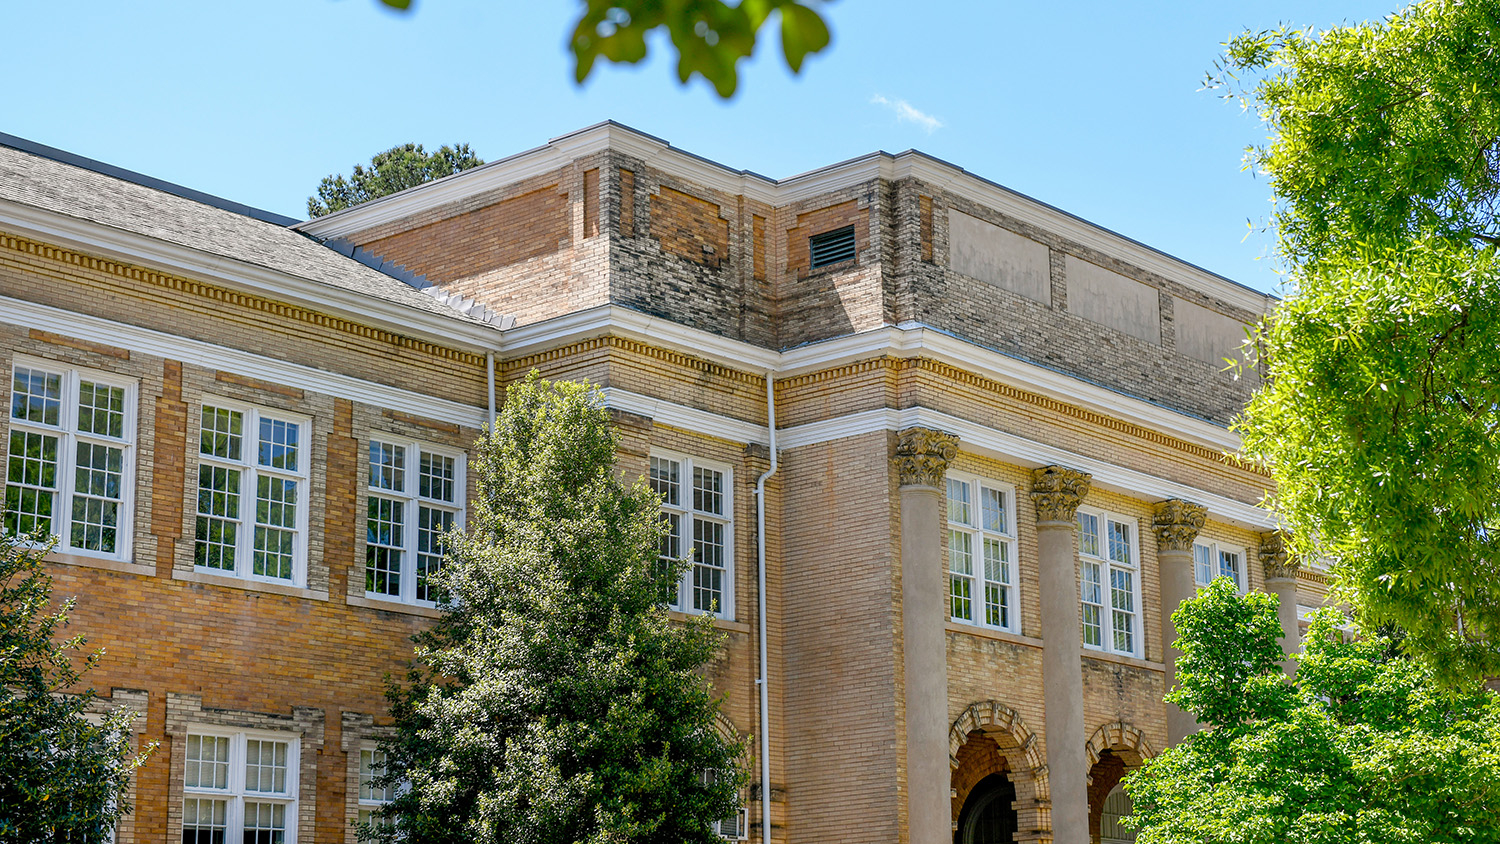 Exterior of Patterson Hall